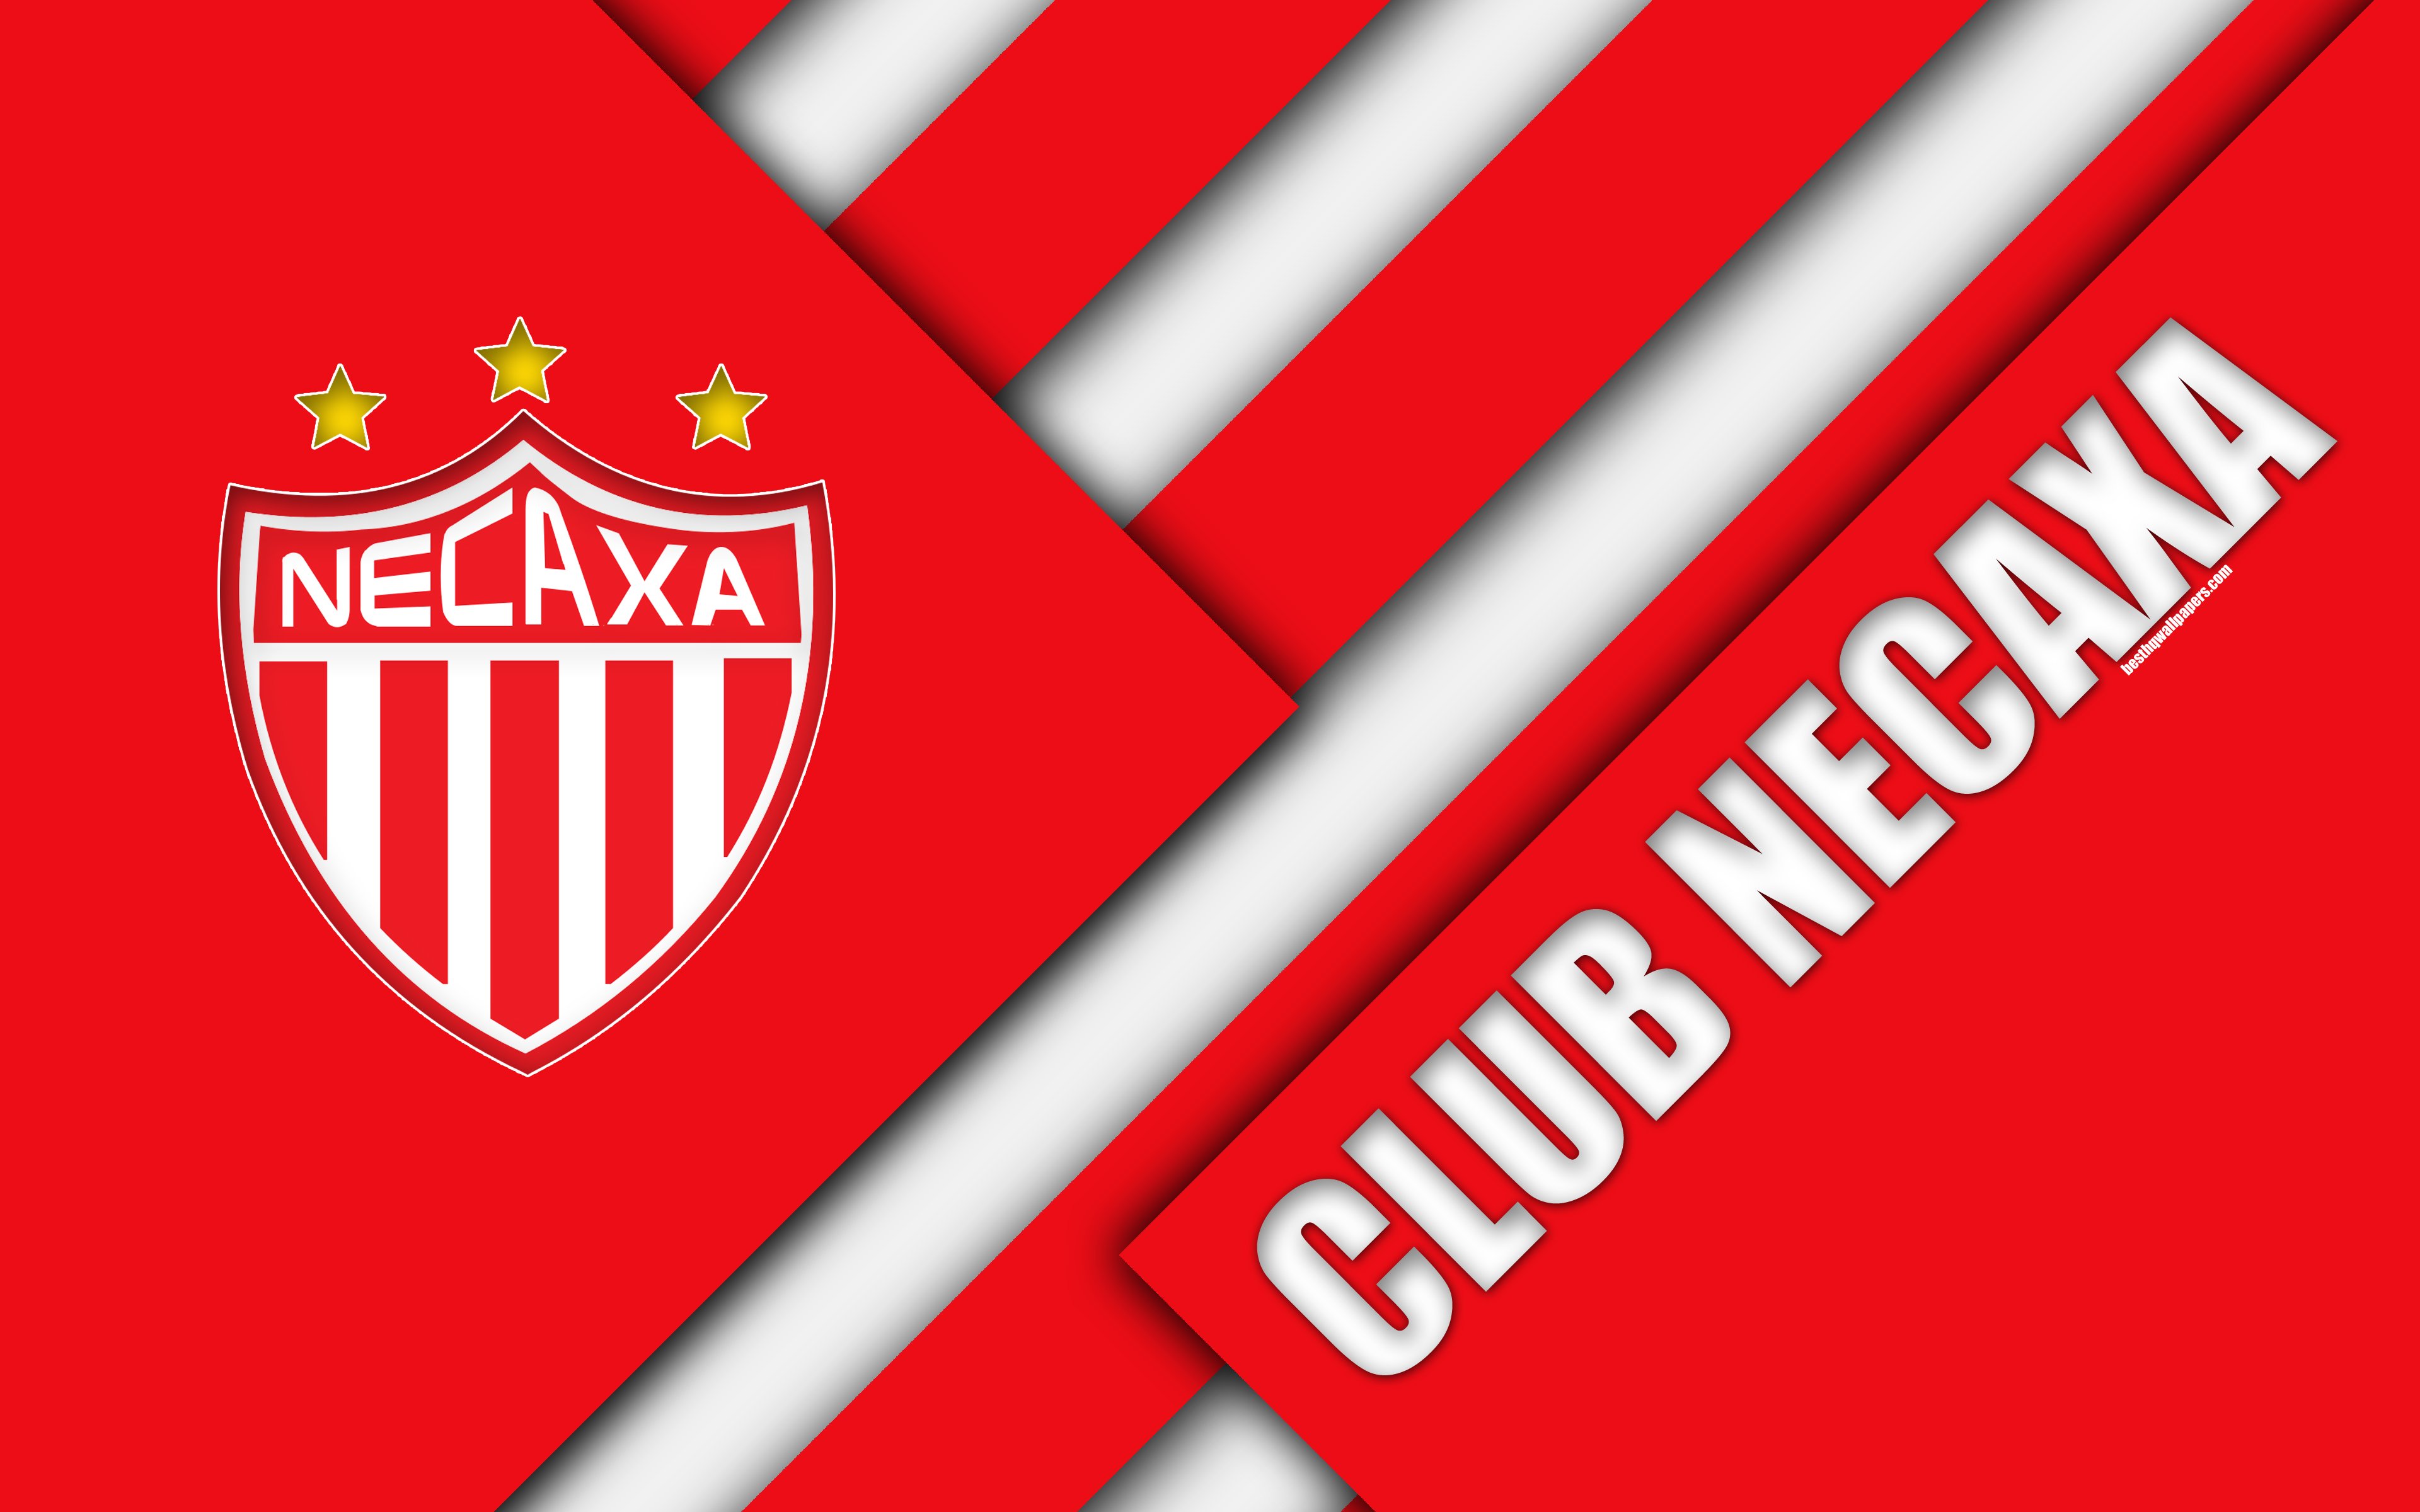 Download wallpapers Club Necaxa, 4K, Mexican Football Club, material  design, logo, red white abstraction, Aguascalientes, Mexico, Primera  Division, Liga MX, Necaxa FC for desktop with resolution 3840x2400. High  Quality HD pictures wallpapers